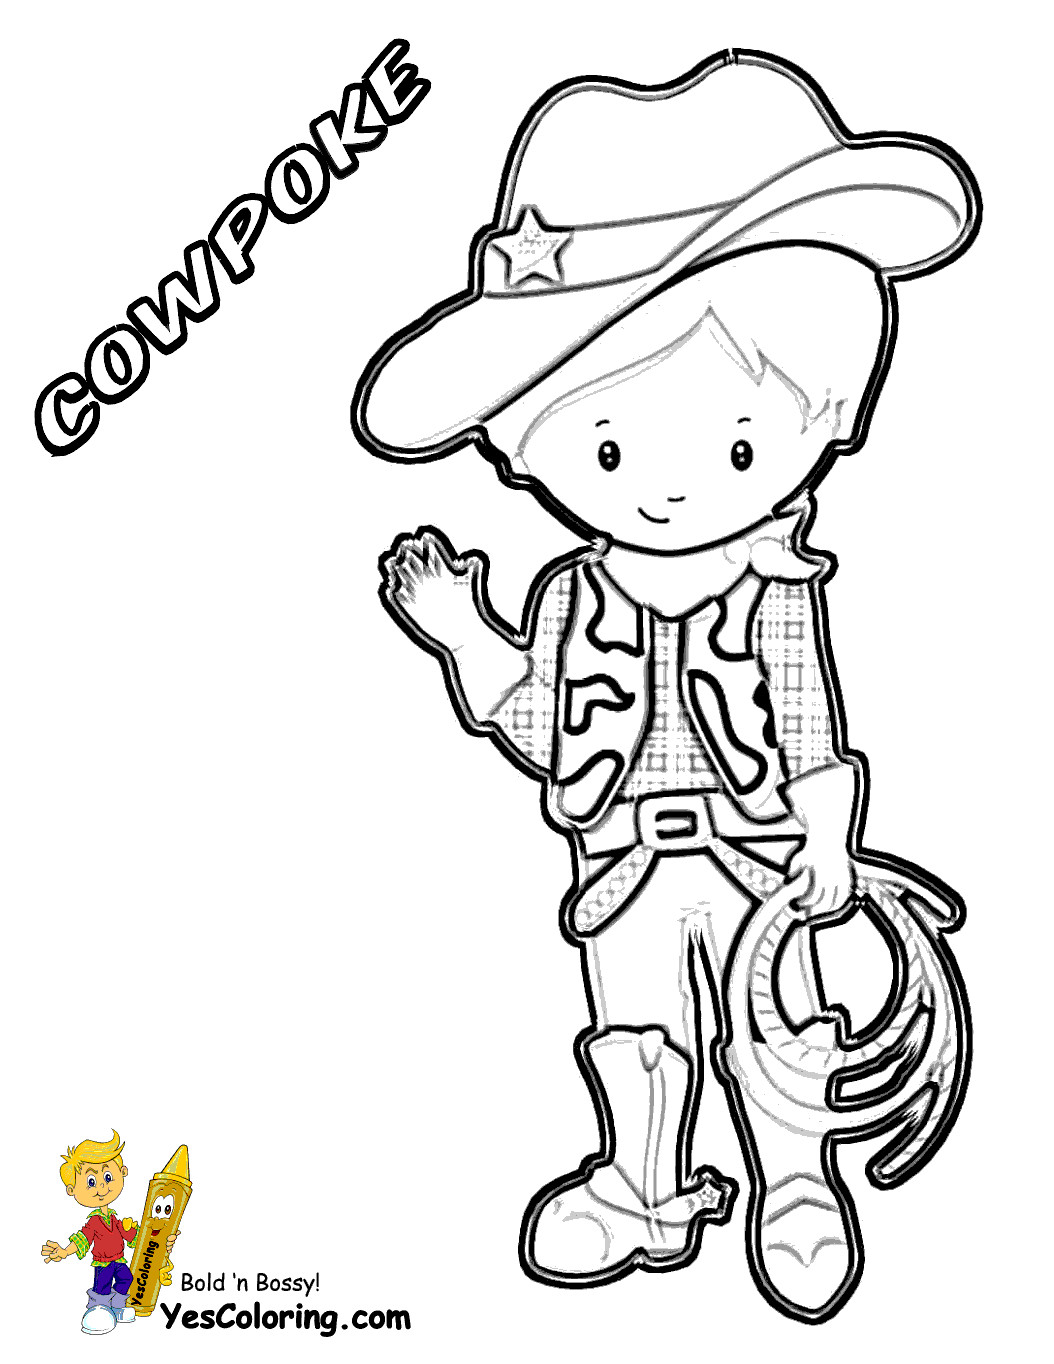 Cowboys Coloring Pages
 Ride em Cowboy Coloring Free Coloring For Kids